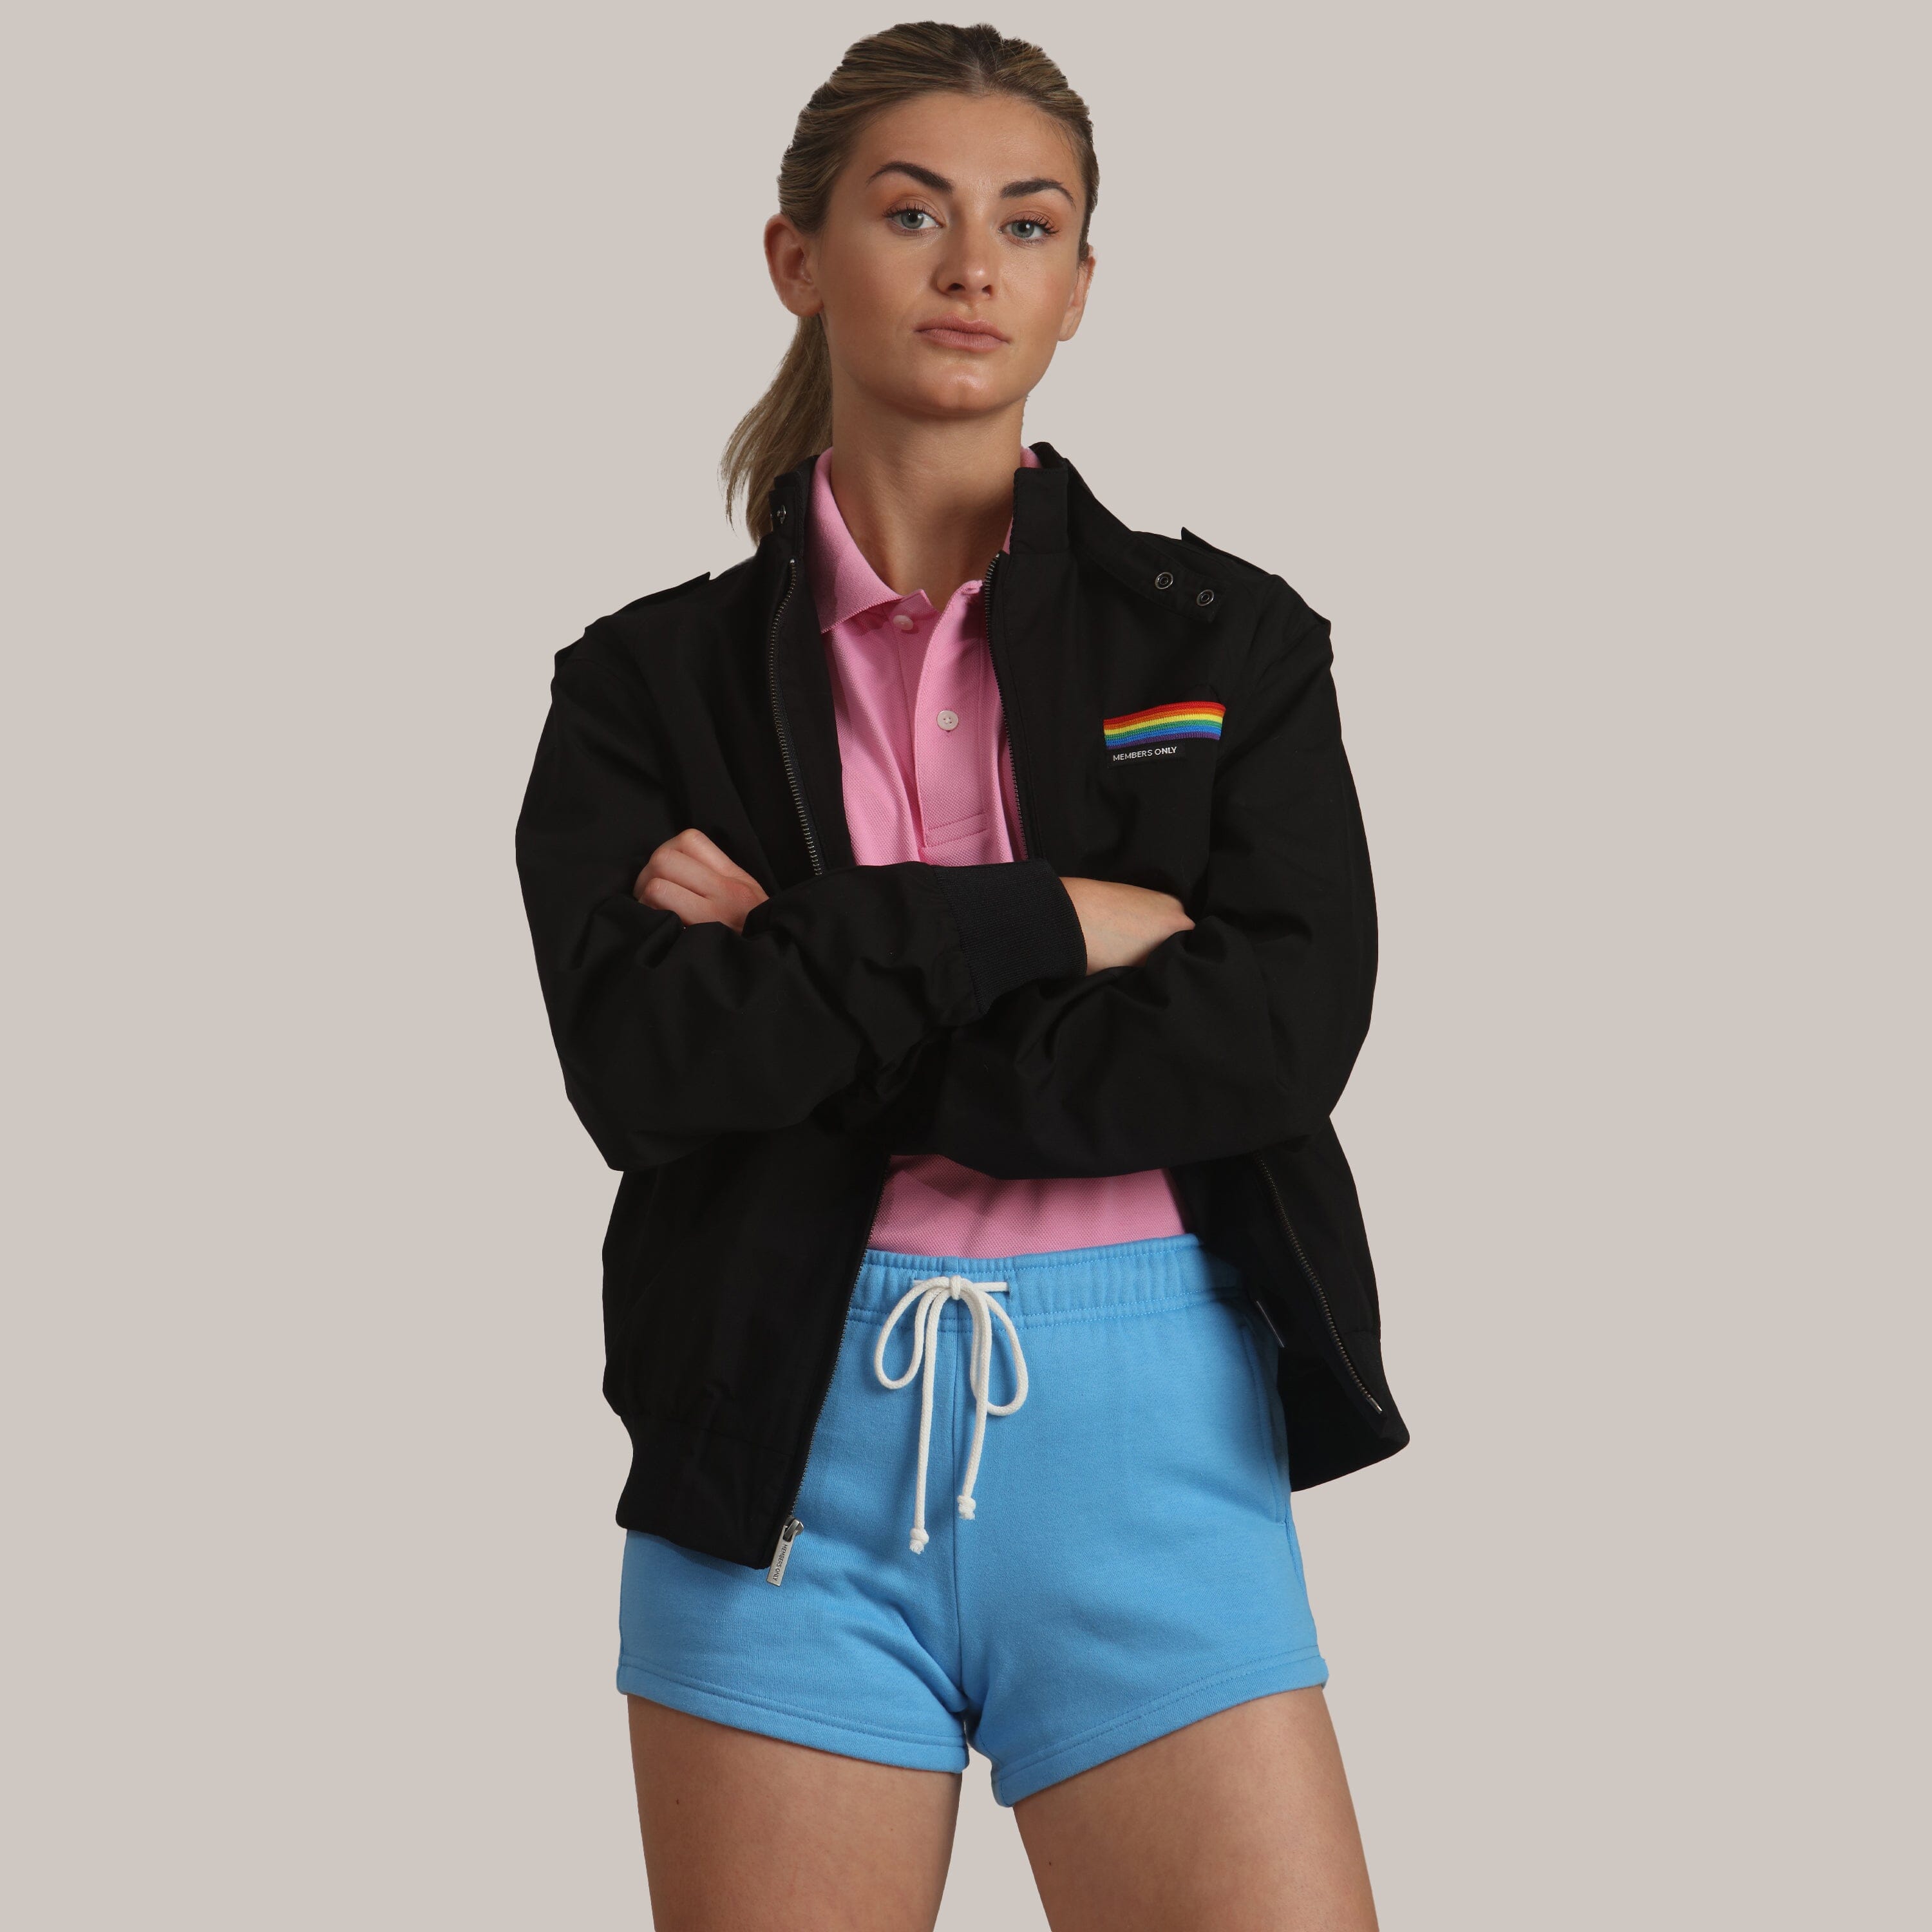 Pride Jacket Women's Iconic Jacket Members Only 